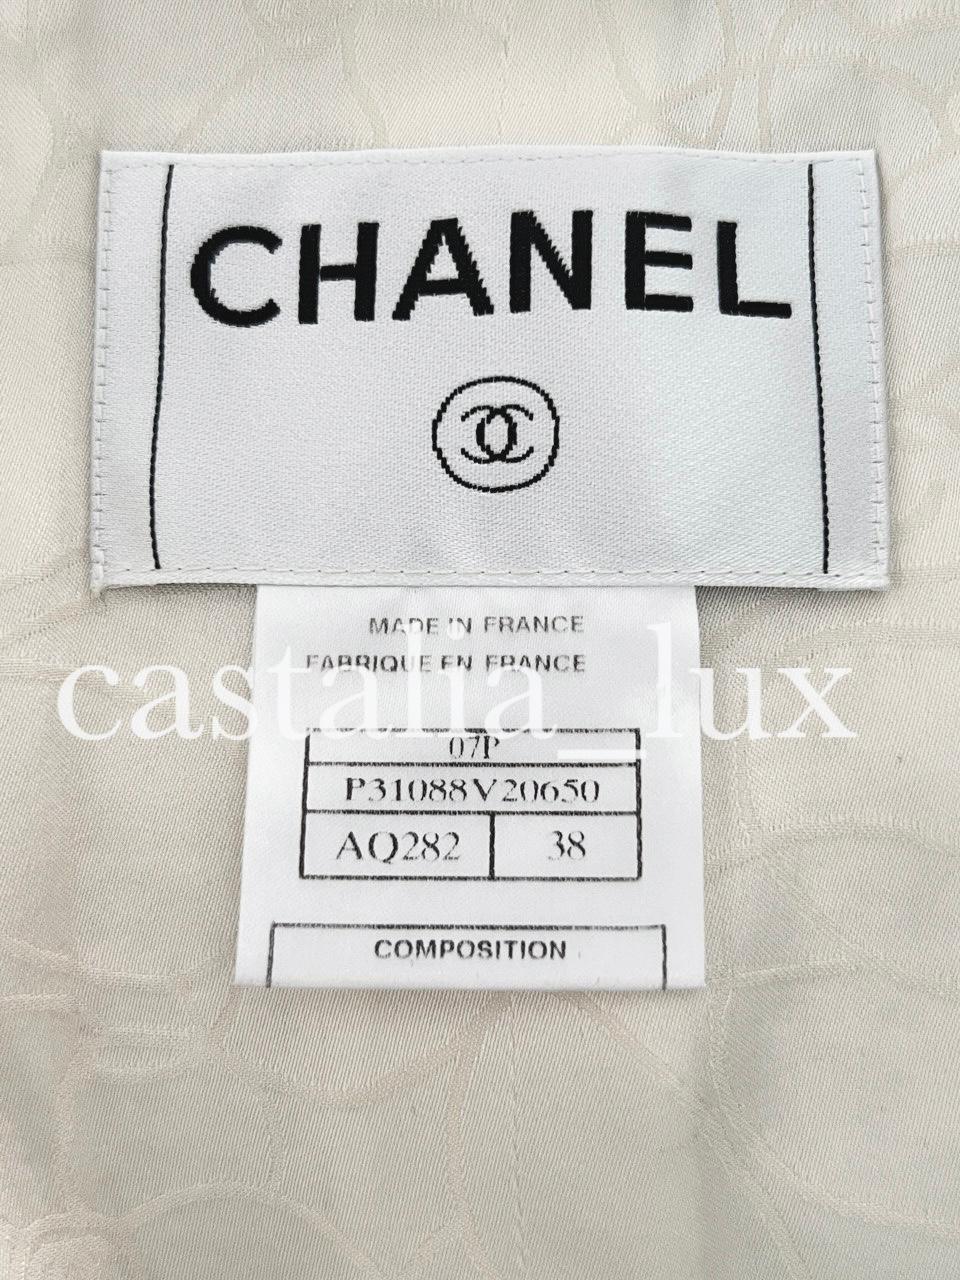 Chanel Extremely Rare Chain Accents Jacket from Ad Campaign For Sale 12